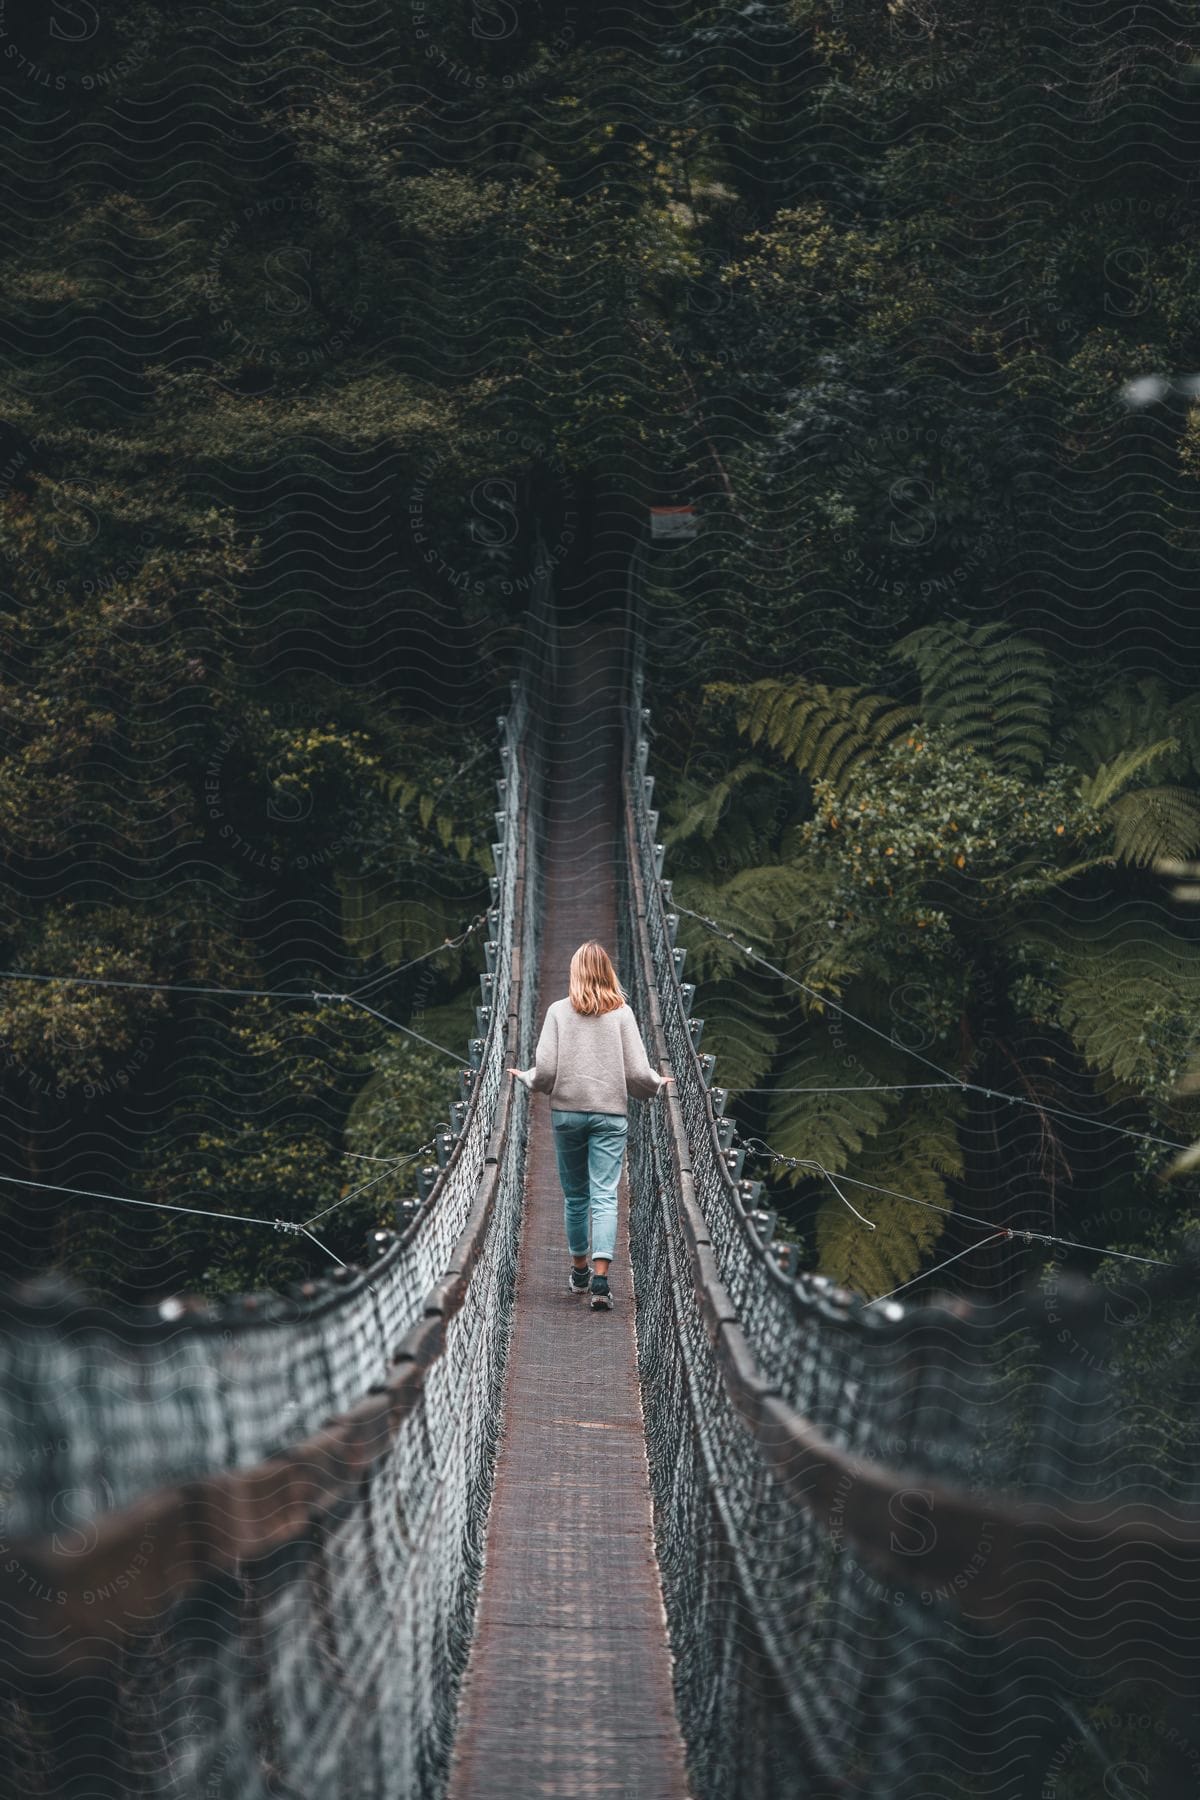 Stock photo of a person on a suspension bridge in new zealand